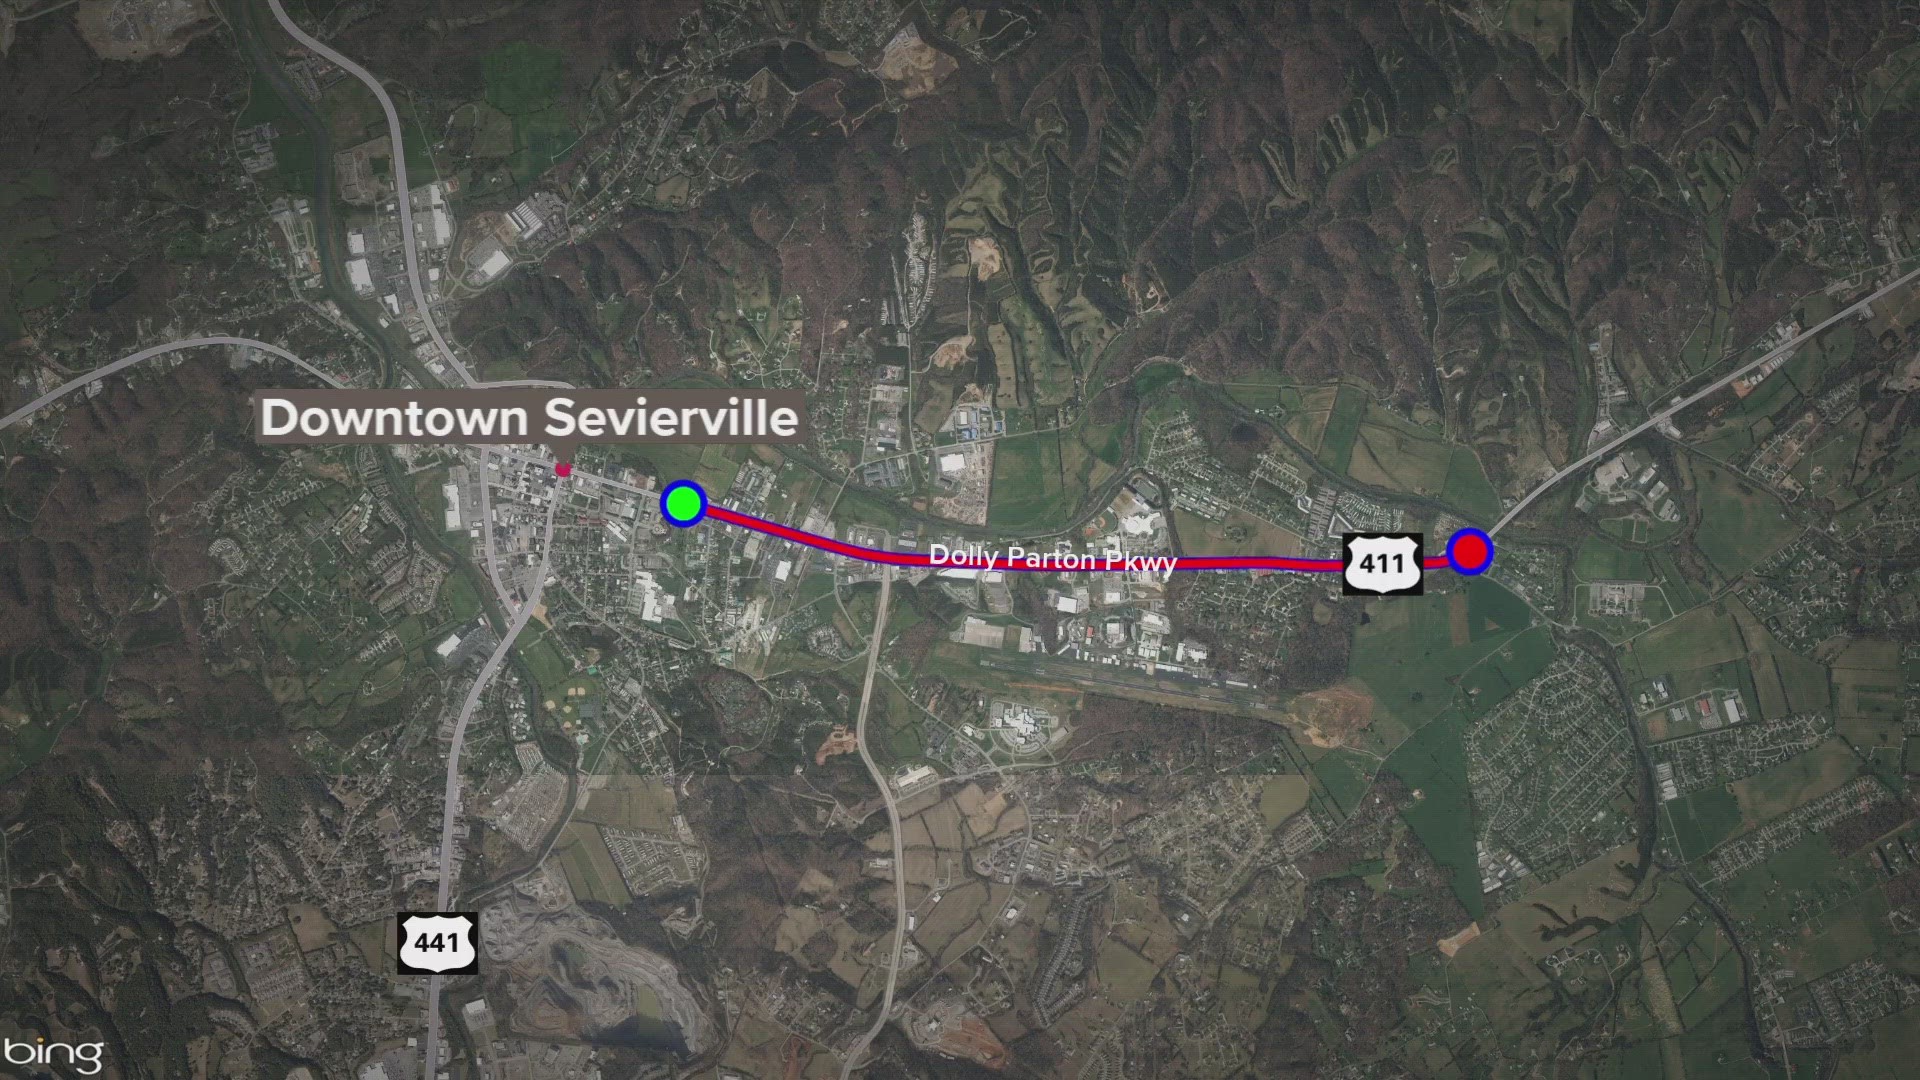 If you take Dolly Parton Parkway in Sevierville, get ready for some delays for the next couple of months.